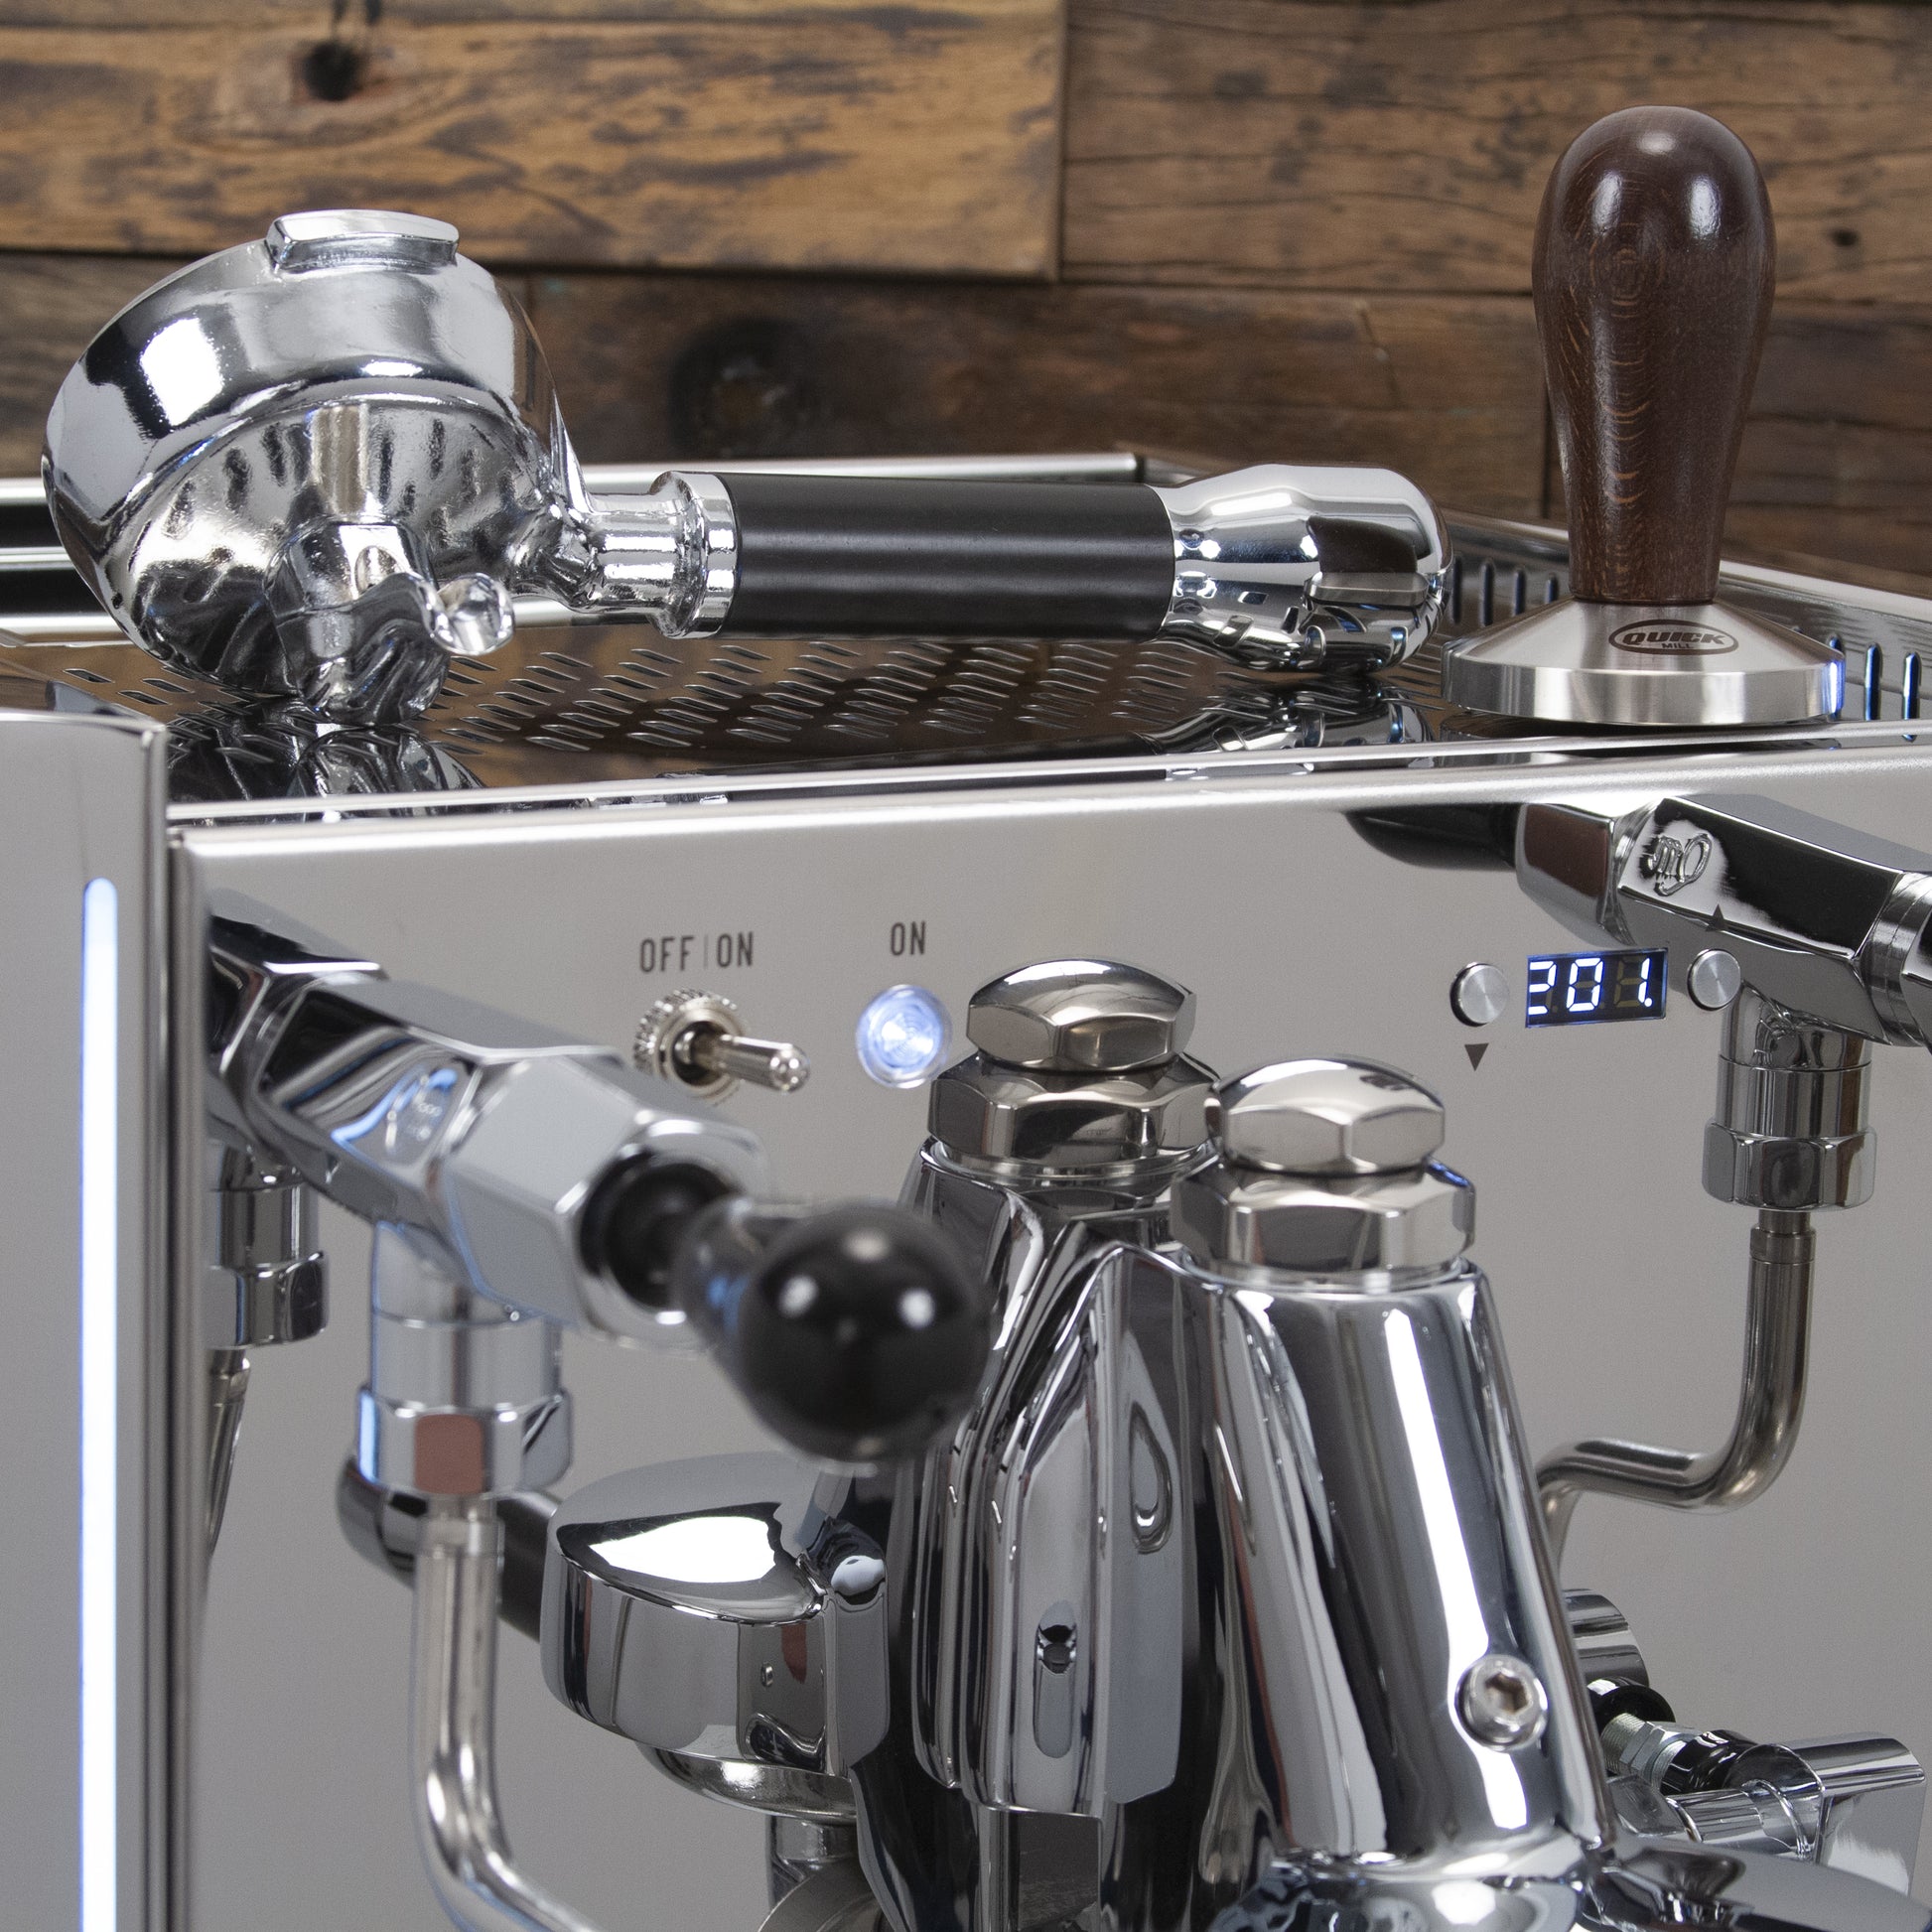 Each Vetrano Design includes a single and double spout portafilter along with a wood handle tamper.